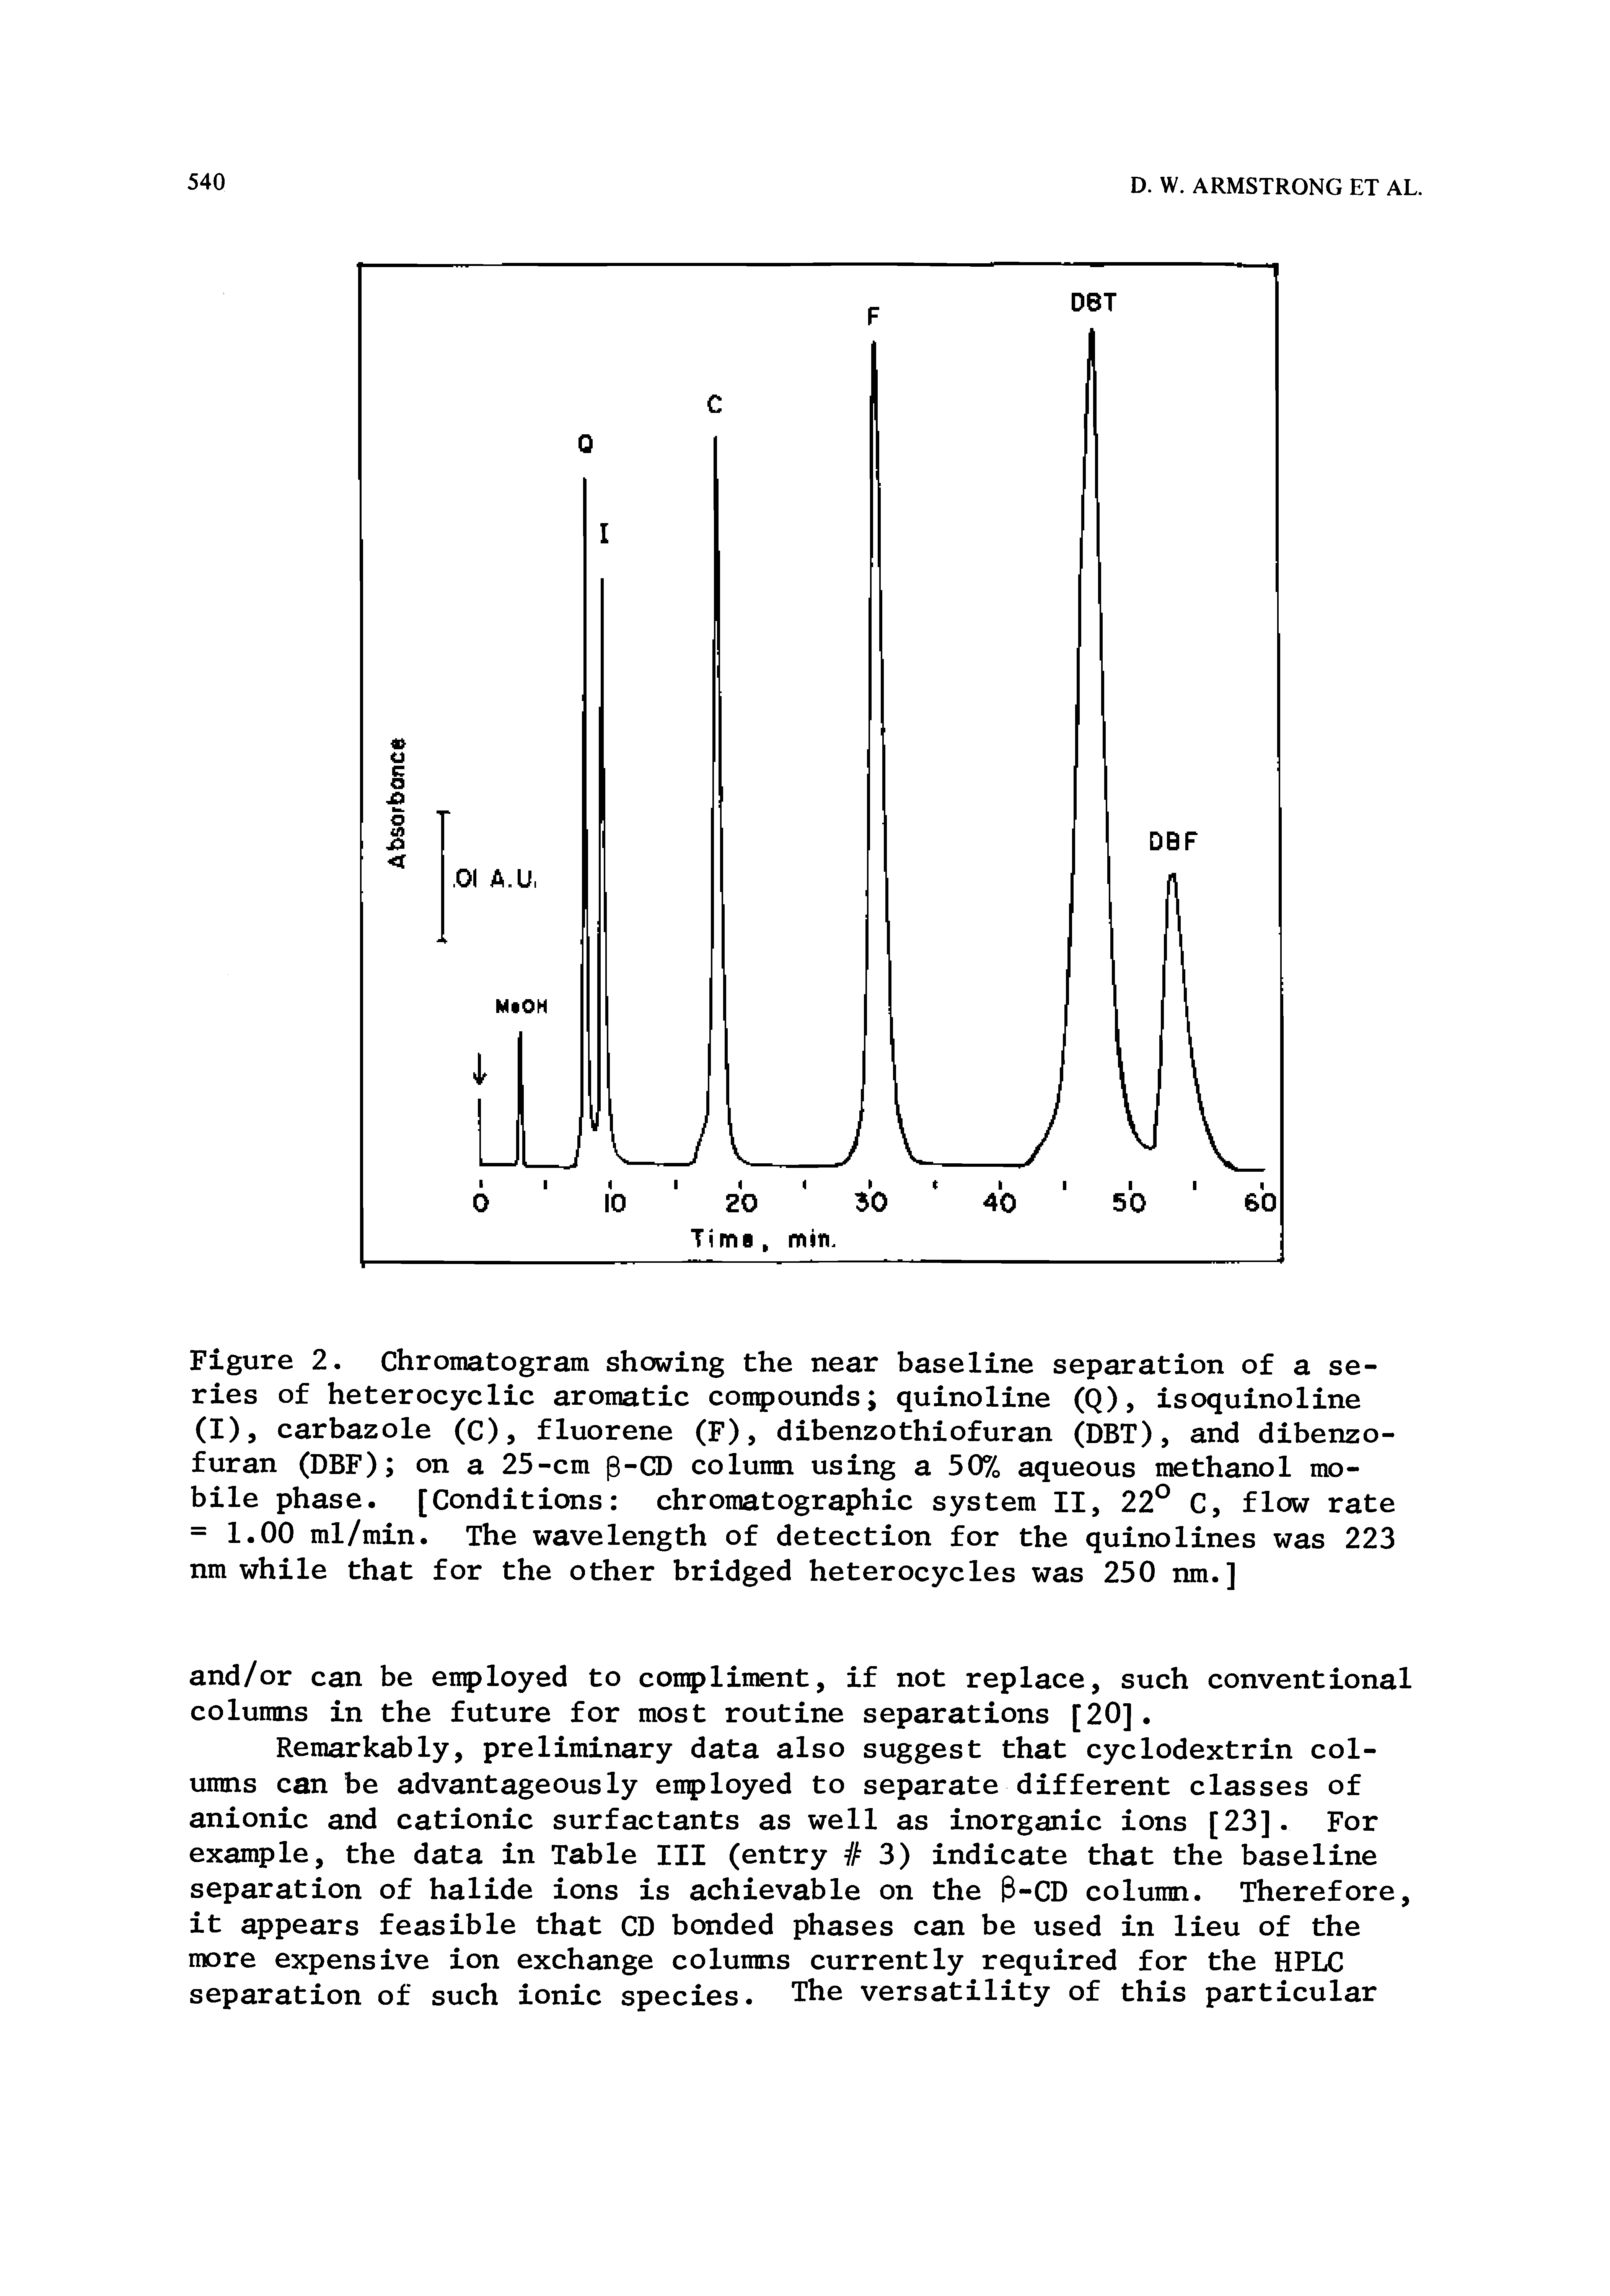 Figure 2. Chromatogram showing the near baseline separation of a series of heterocyclic aromatic compounds quinoline (Q), isoquinoline (I), carbazole (C), fluorene (F), dibenzothiofuran (DBT), and dibenzo-furan (DBF) on a 25-cm p-CD column using a 50% aqueous methanol mobile phase. [Conditions chromatographic system II, 22° C, flow rate = 1.00 ml/min. The wavelength of detection for the quinolines was 223 nm while that for the other bridged heterocycles was 250 nm.]...